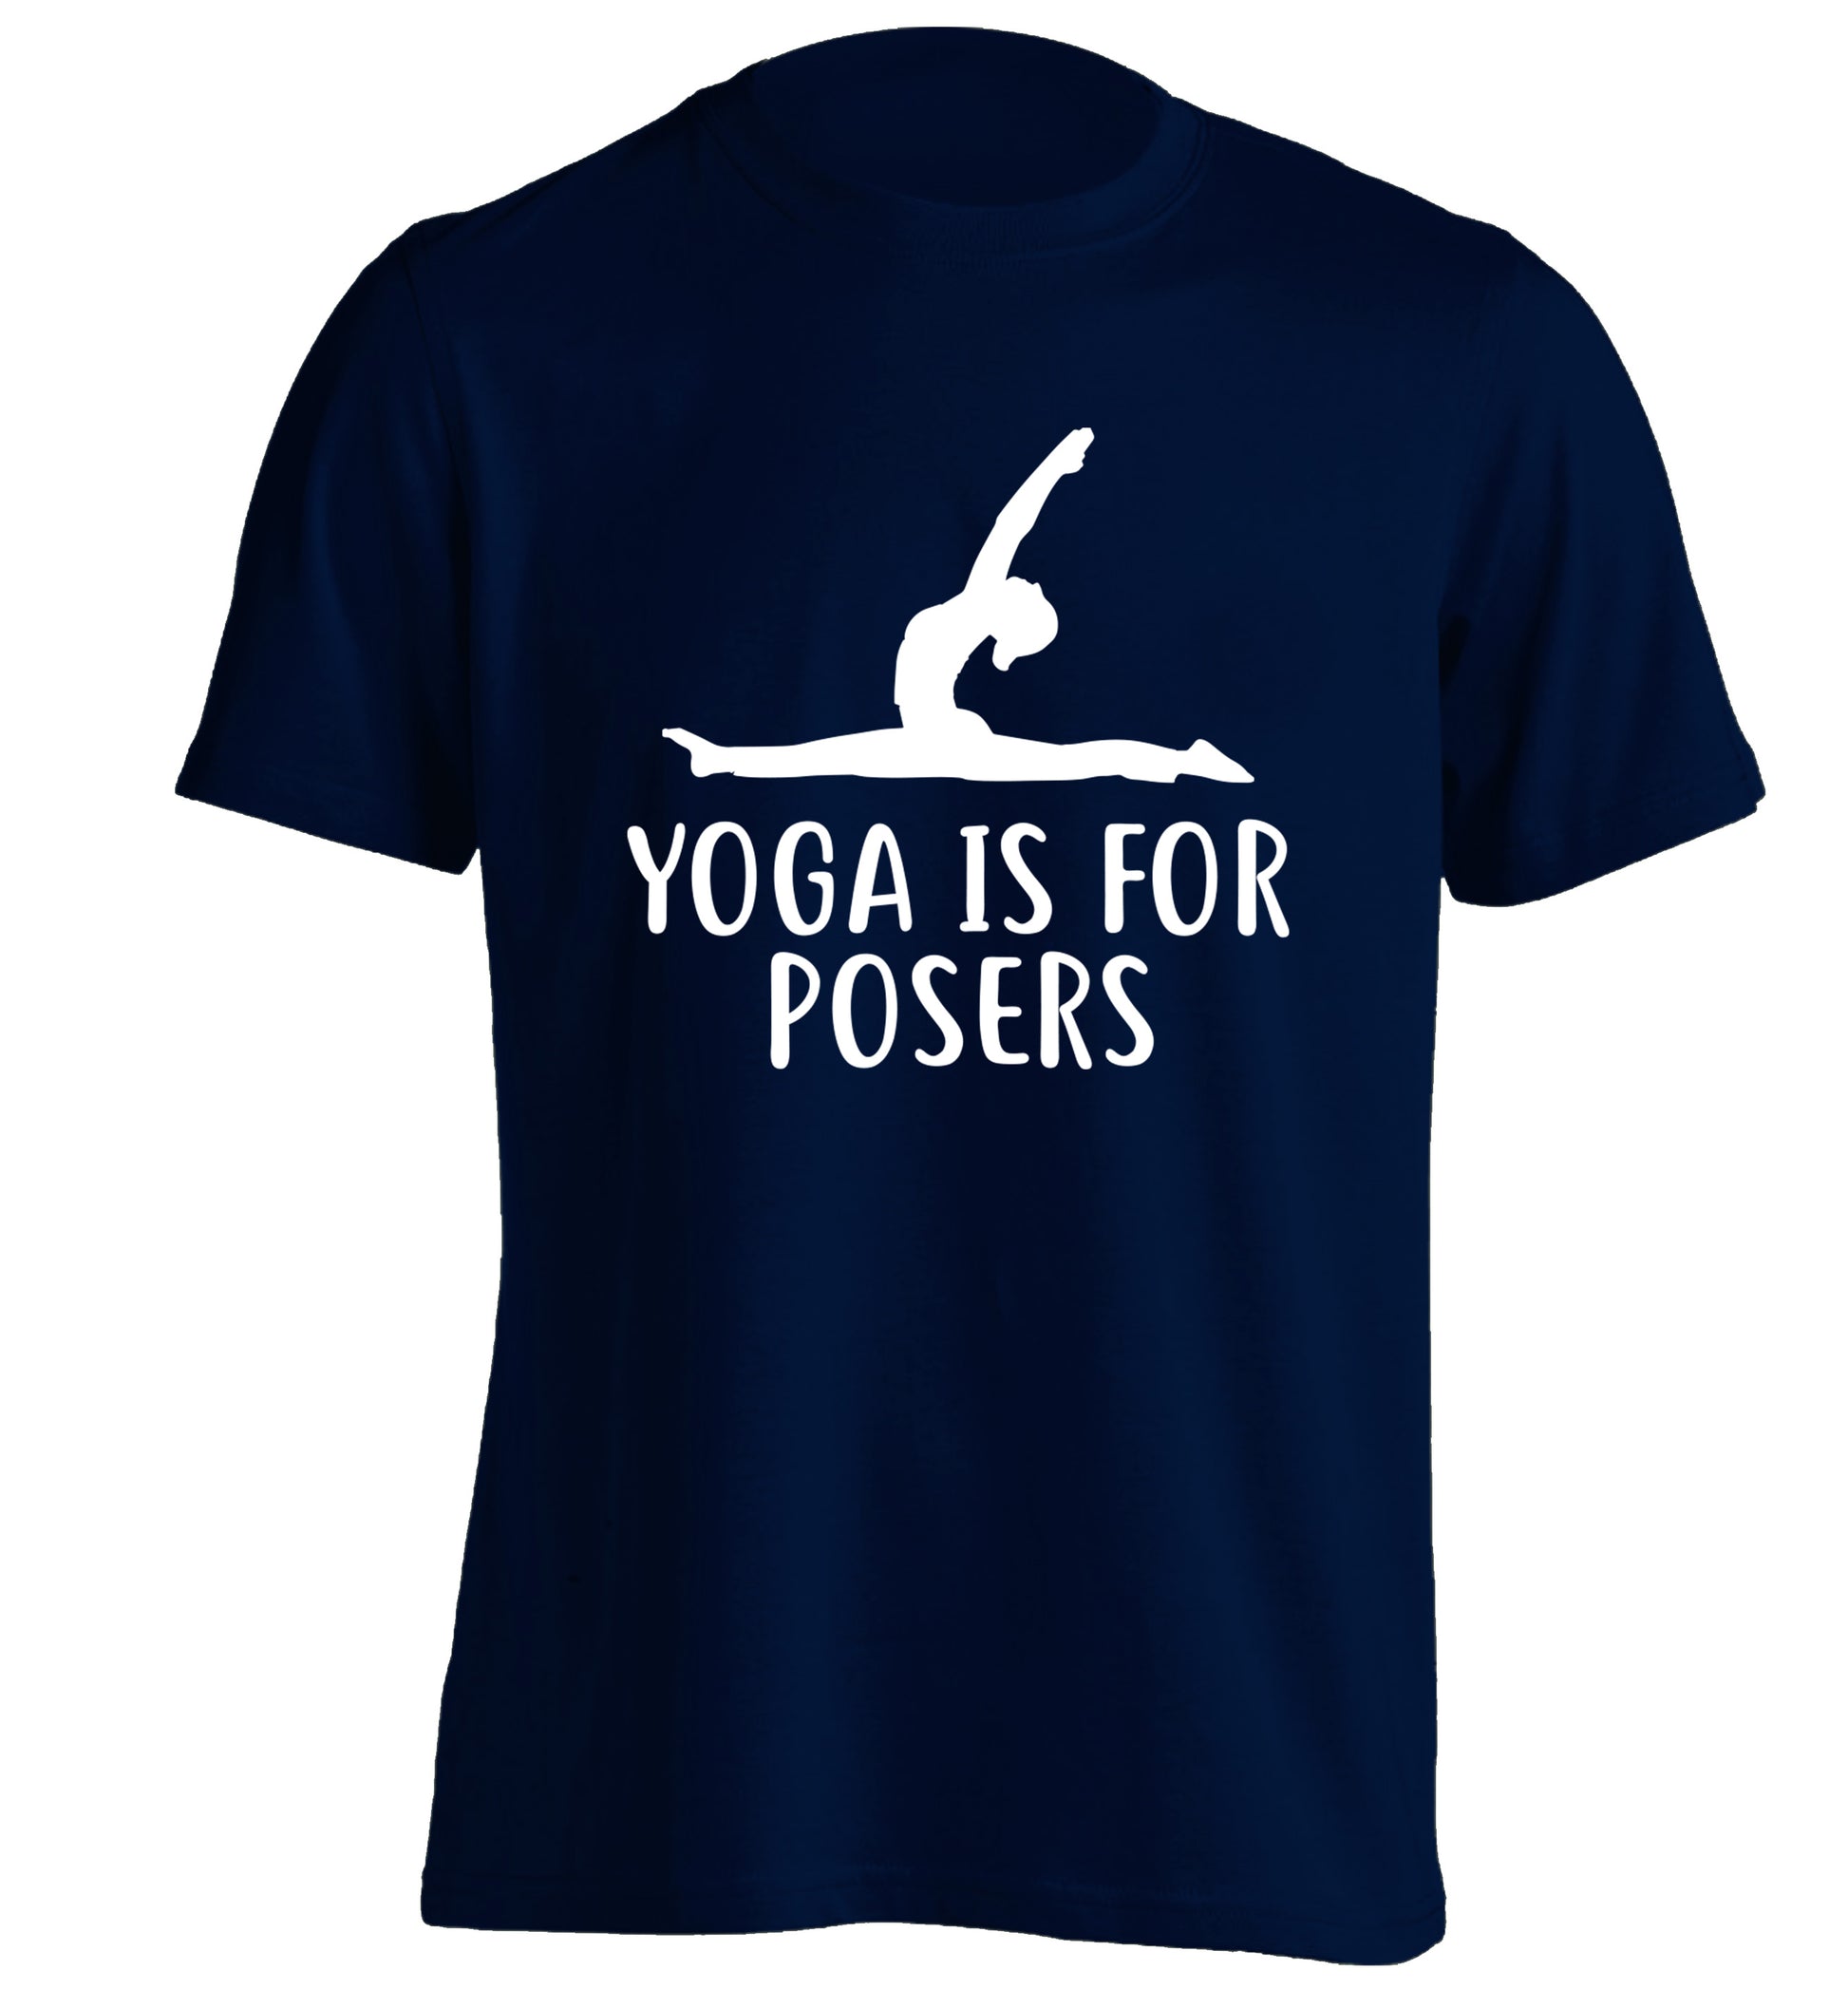 Yoga is for posers adults unisex navy Tshirt 2XL